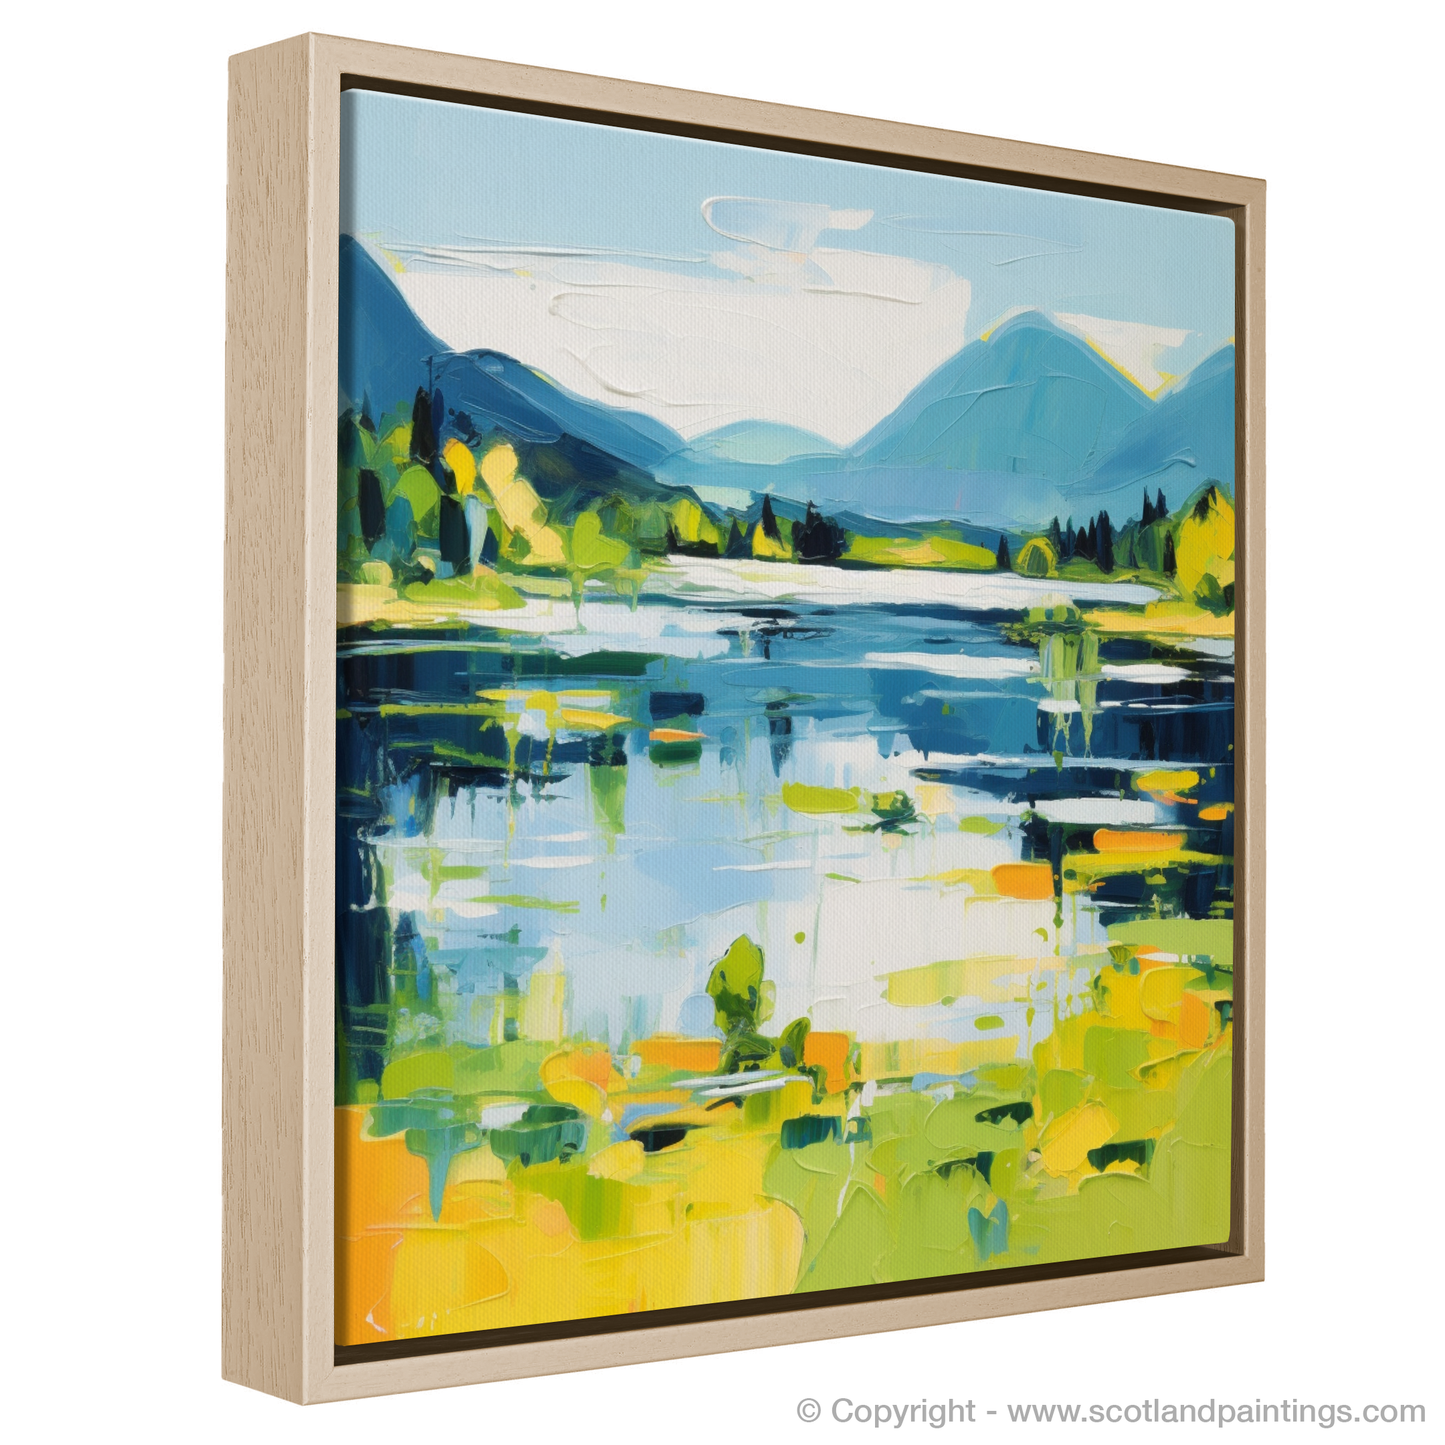 Painting and Art Print of Loch Achray in summer. Abstract Serenade of Loch Achray in Summer Splendour.